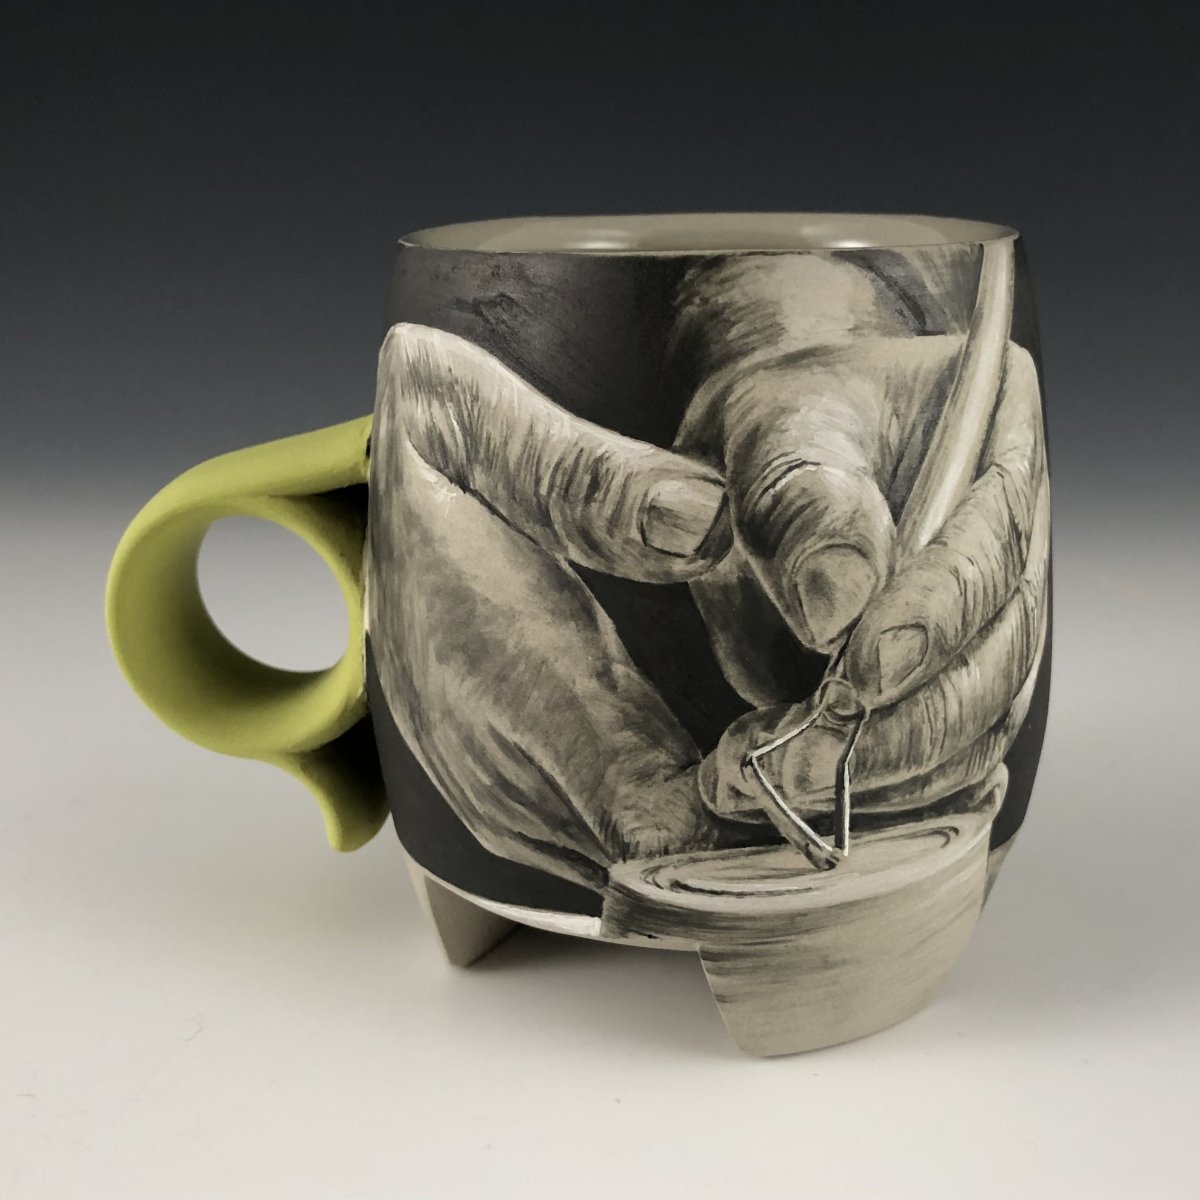 Hand-painted porcelain mug with hands doing pottery.